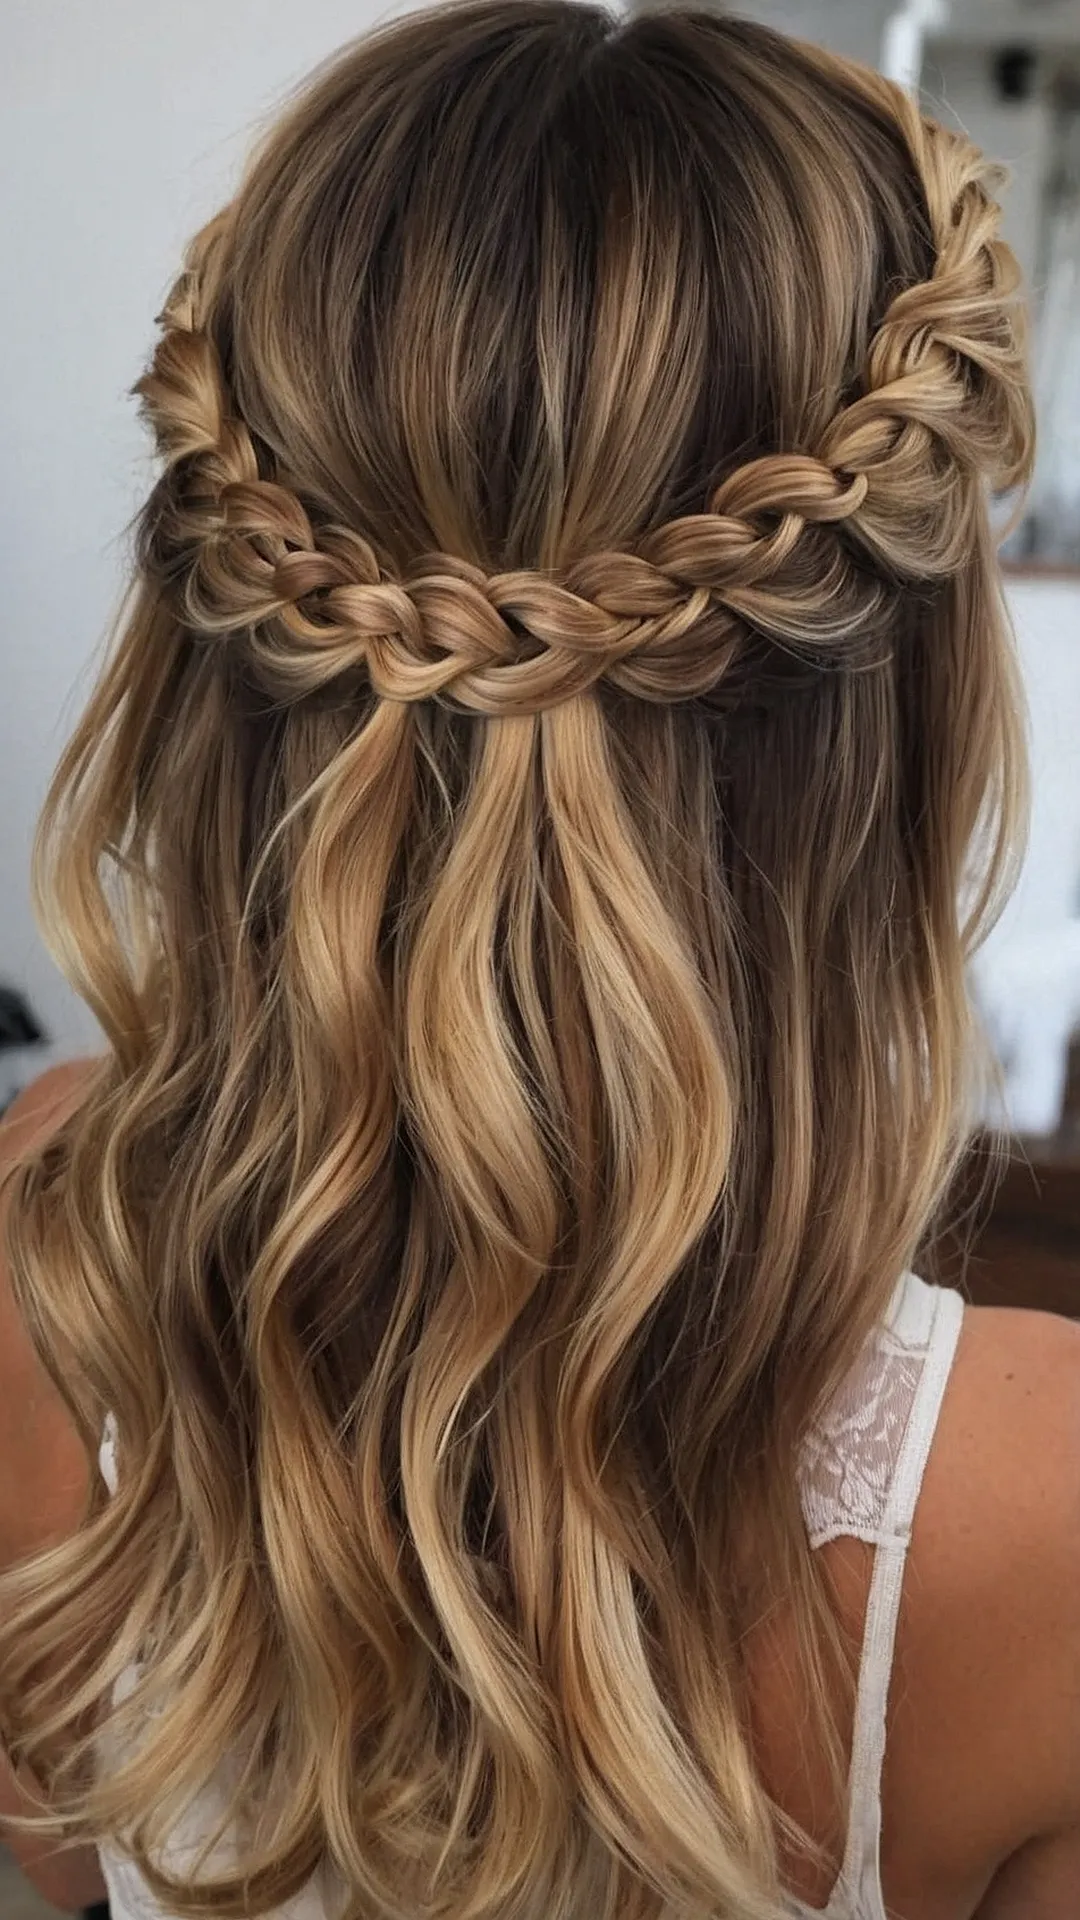 Chic Tresses and Elaborate Updos